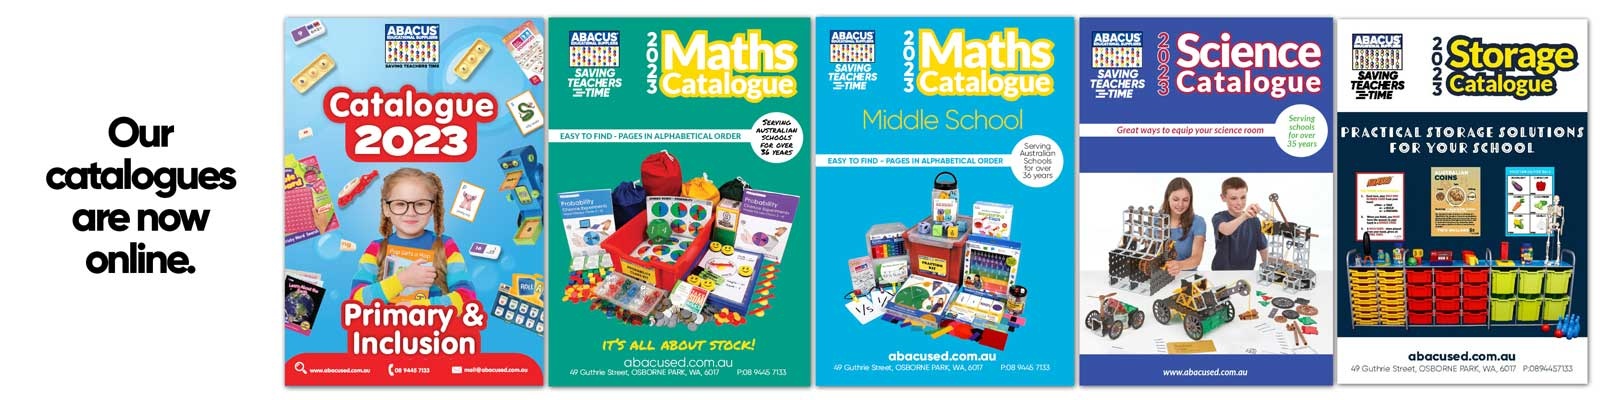 Check out our Digital Online Catalogues